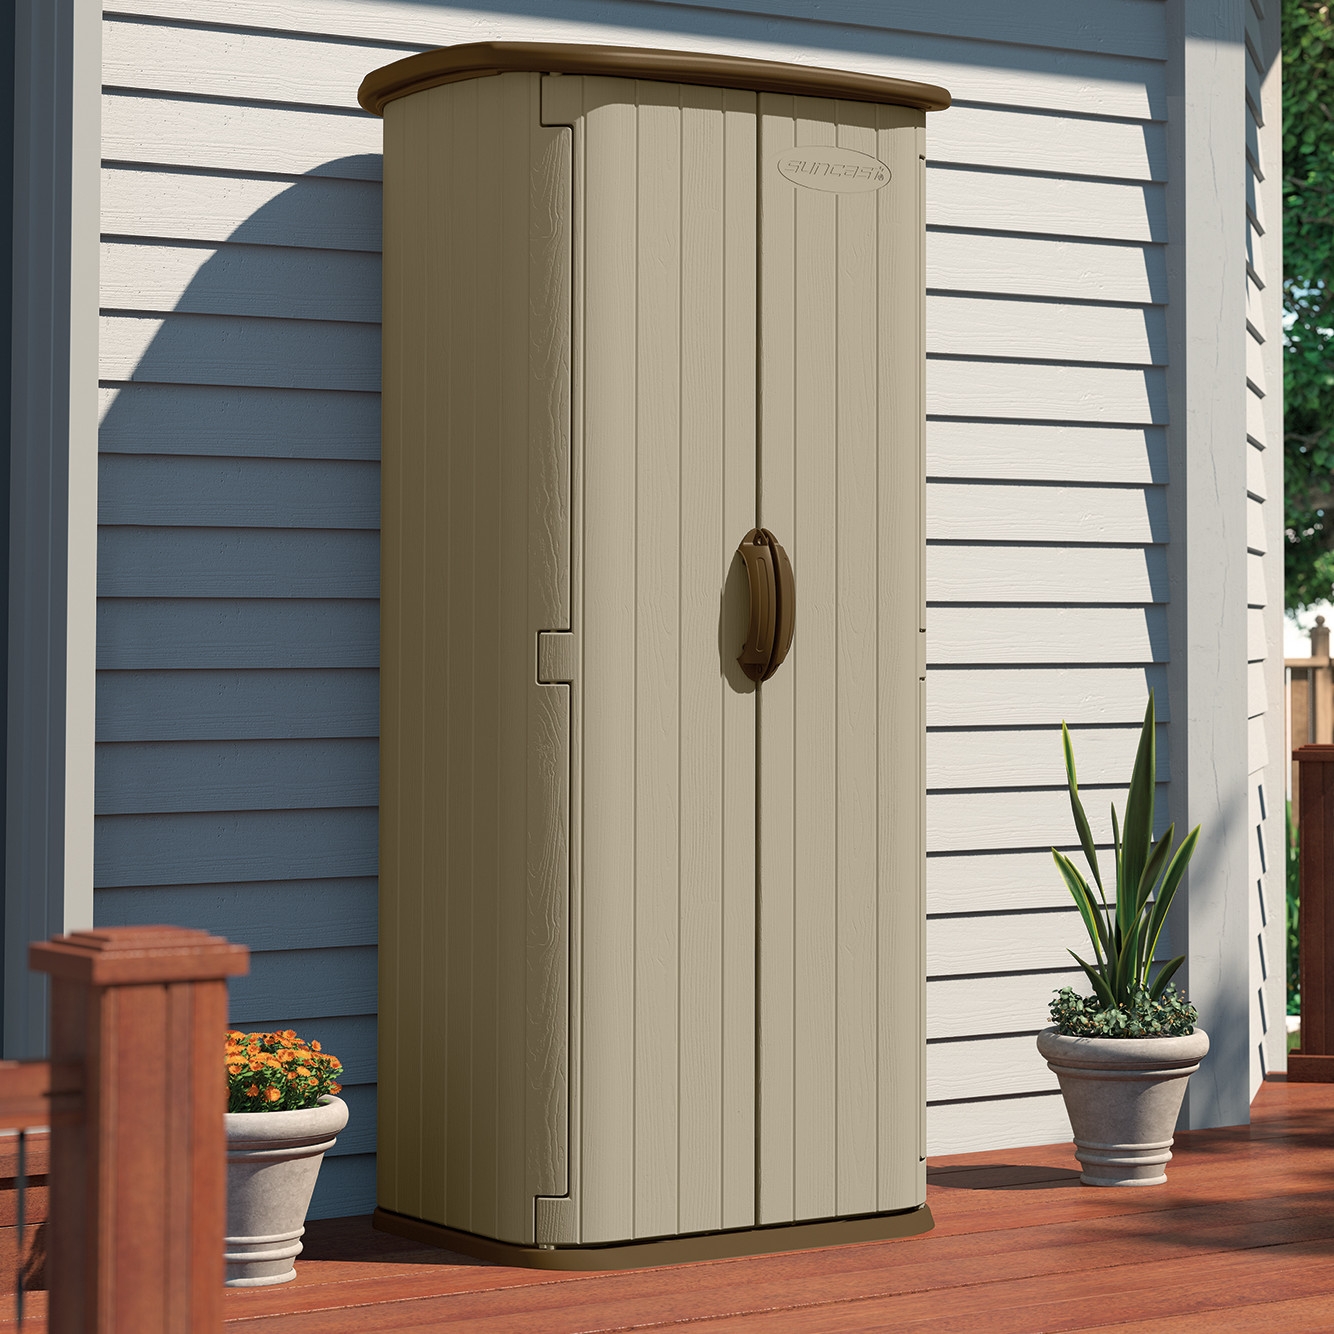 durable double wall resin outdoor garden tool storage shed - made in VKTHLMH